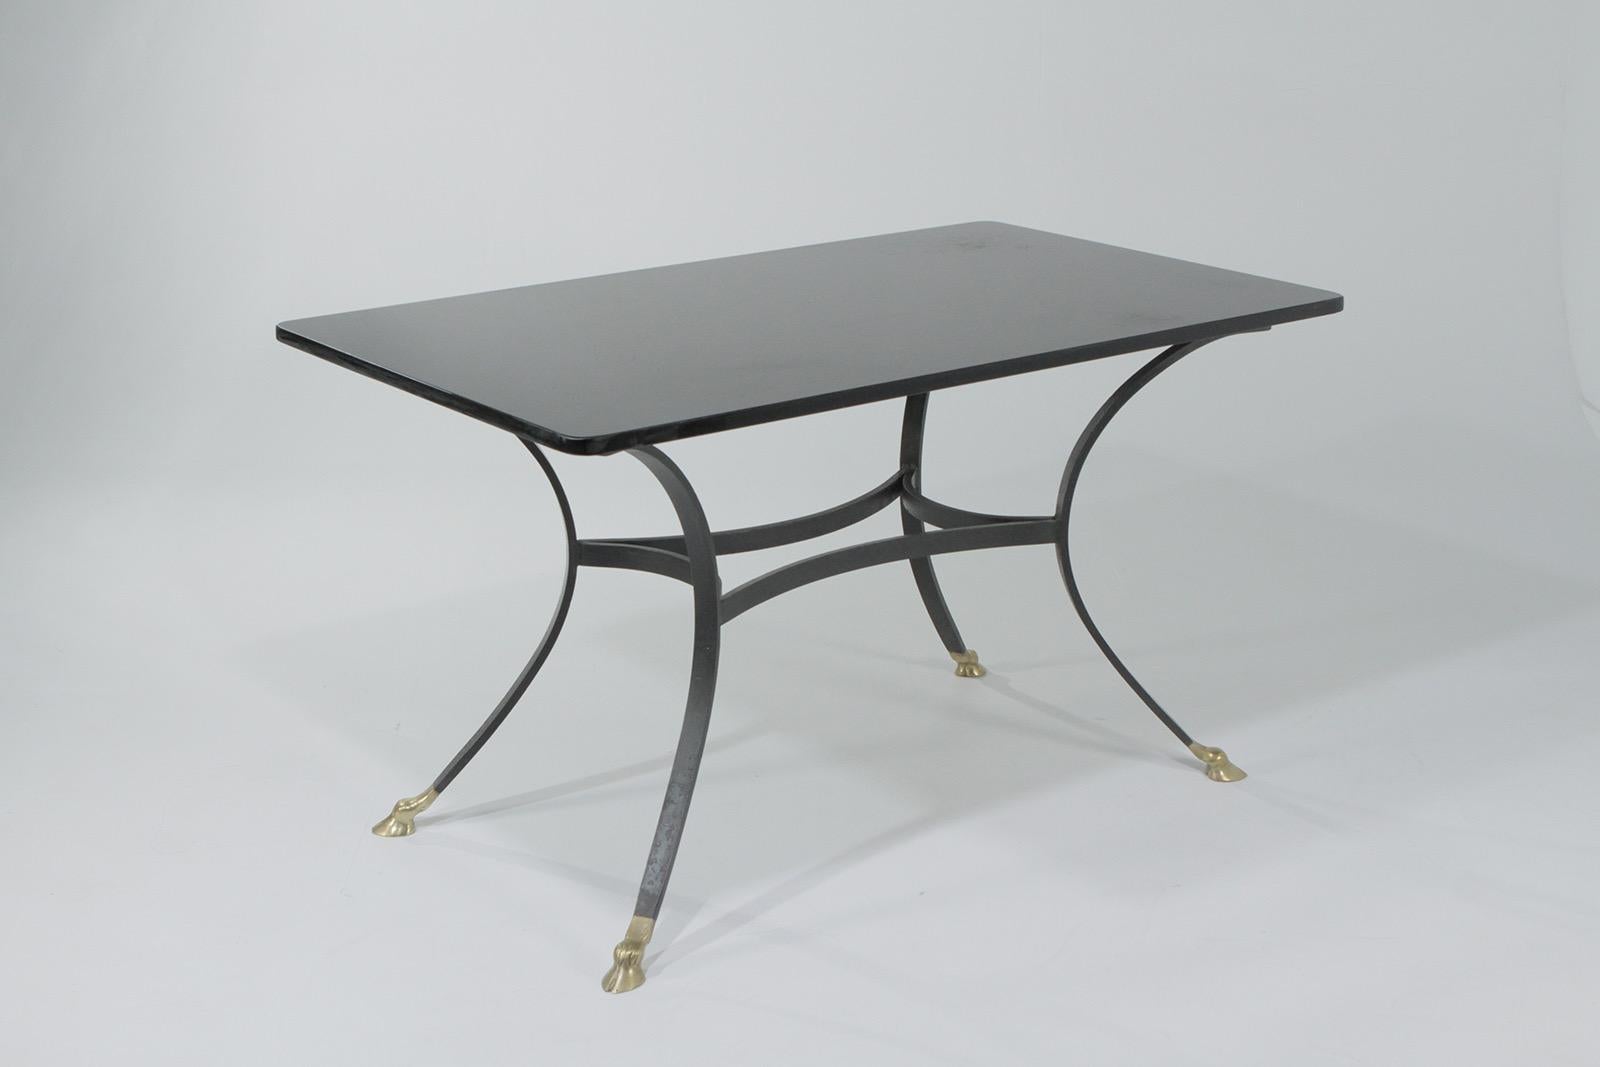 A glamorous medium sized dining table having a sexy thick black glass top and black wrought iron base with cast bronze hoof feet in the manner of labarge. The top is original with minor signs of surface use.

